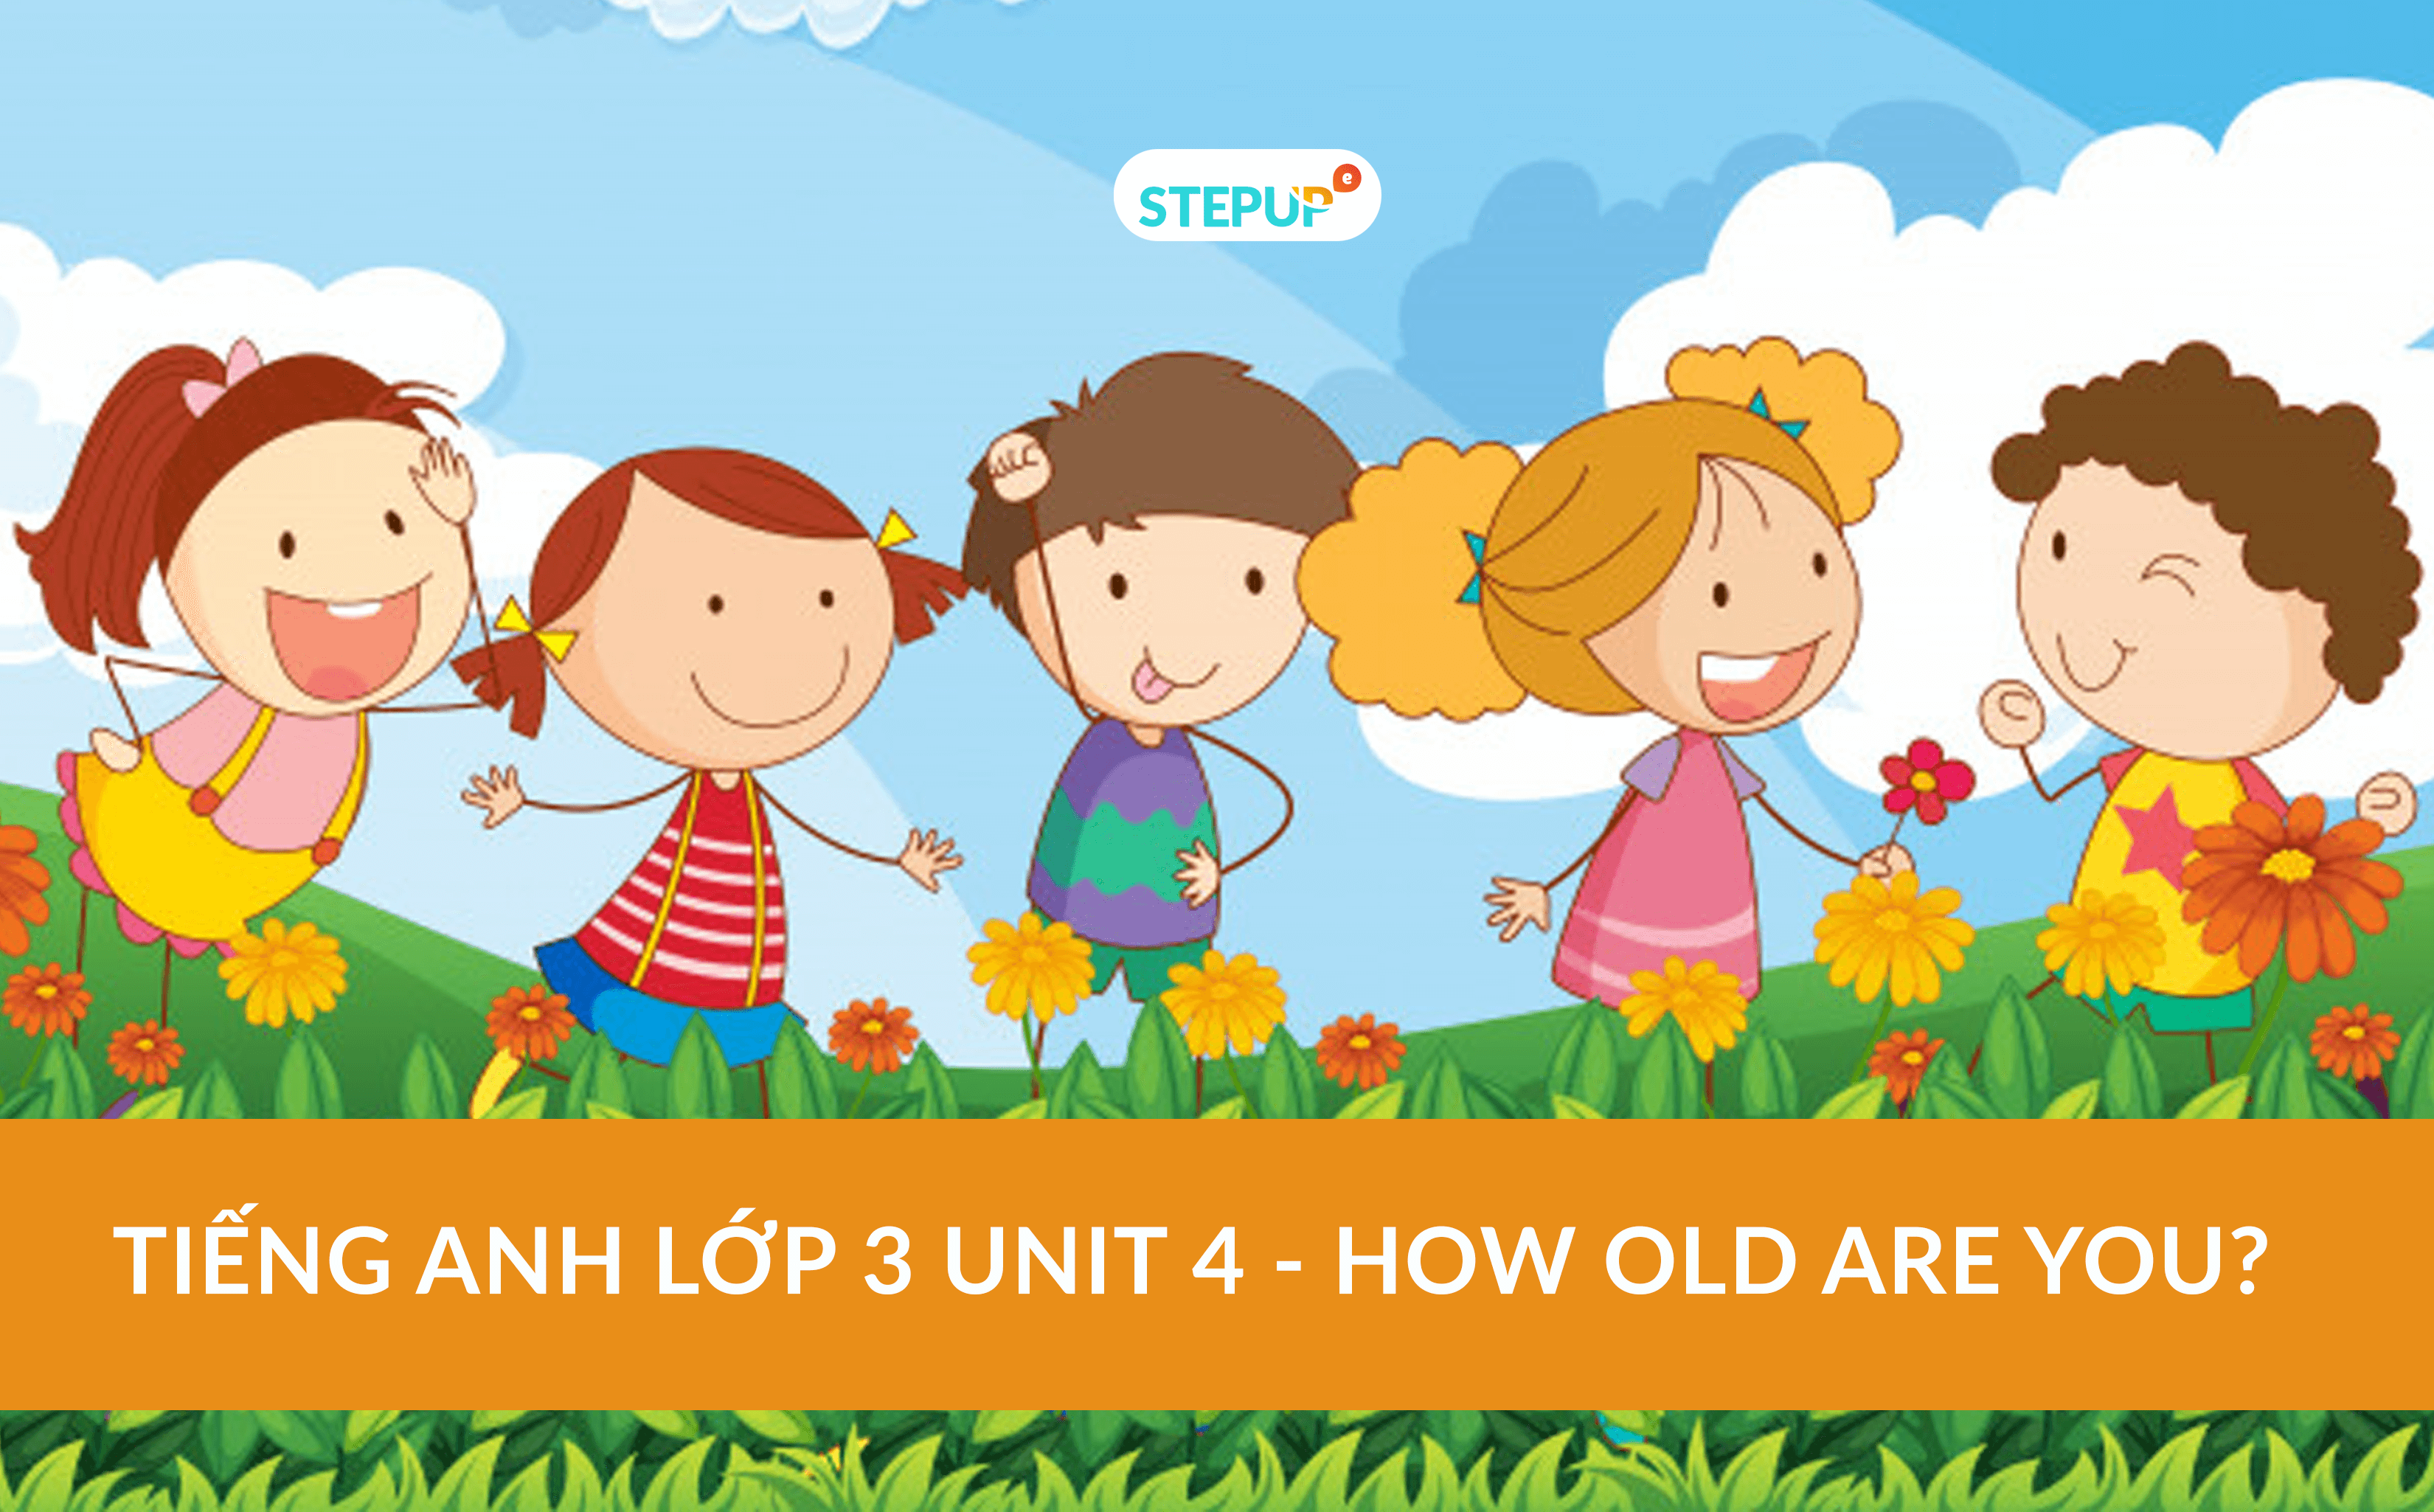 Tiếng Anh lớp 3 unit 4 - How old are you?